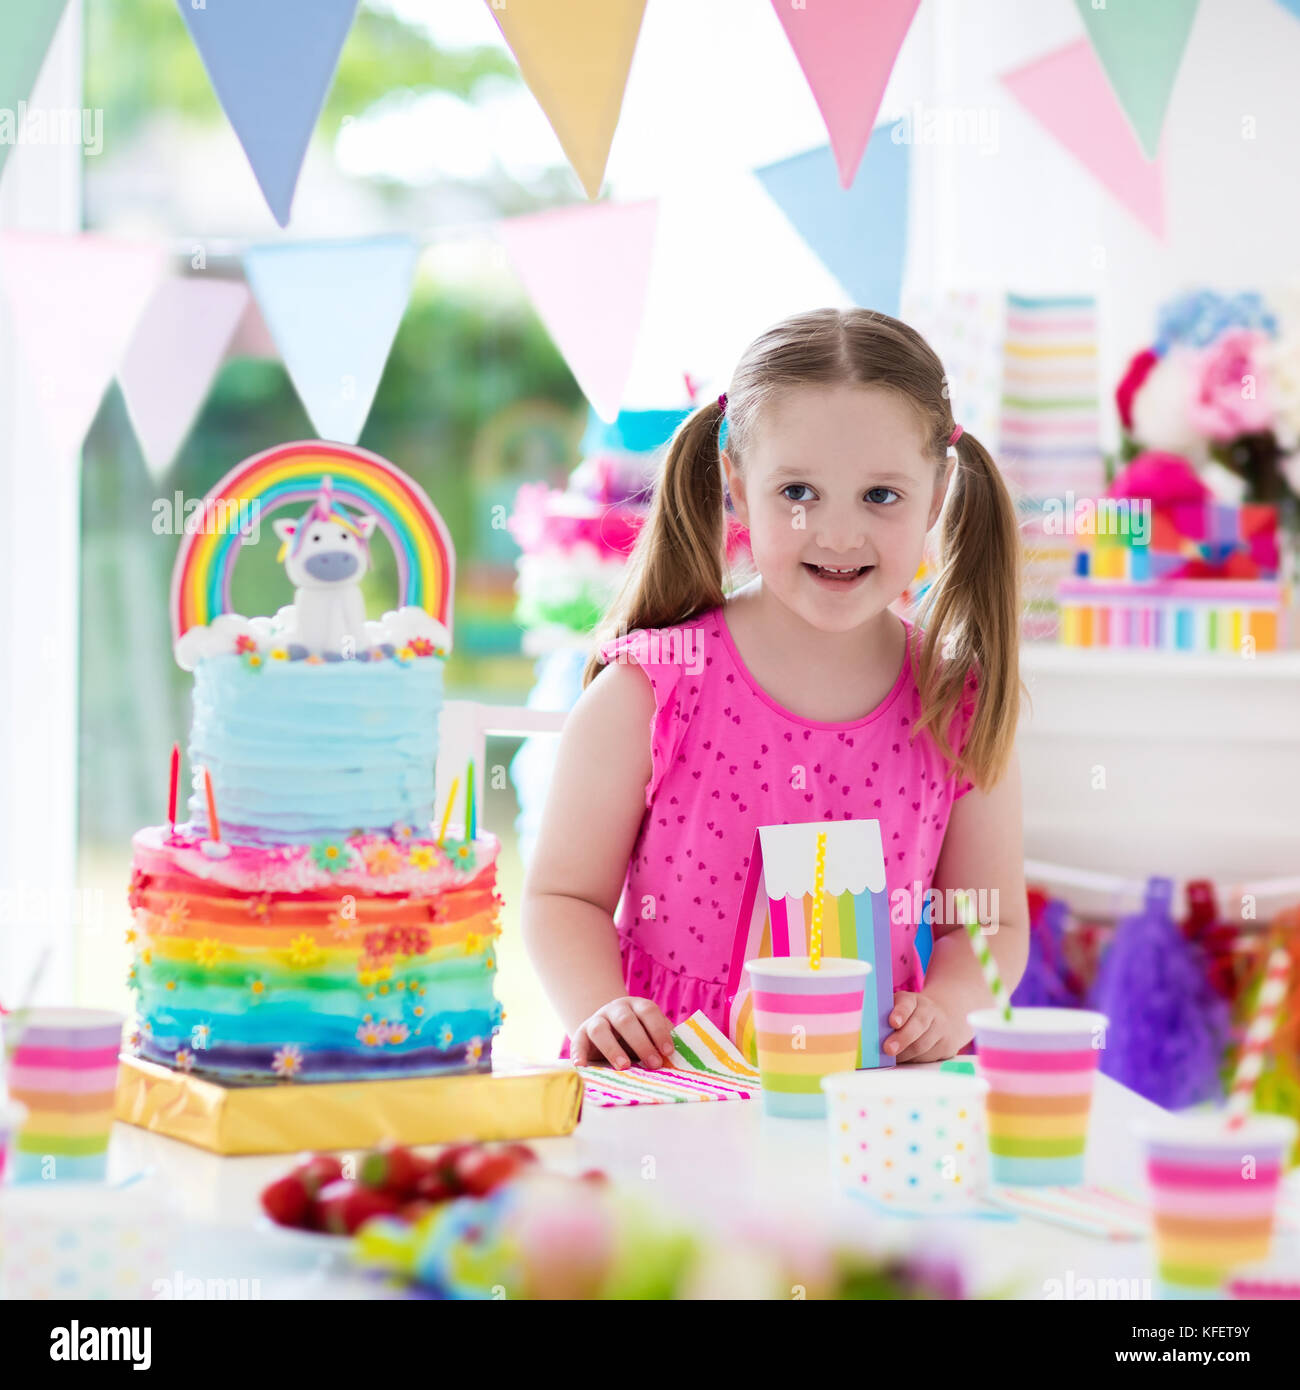 Kids birthday party with colorful pastel decoration and unicorn rainbow cake. Little girl with sweets, candy and fruit. Balloons and banner at festive Stock Photo